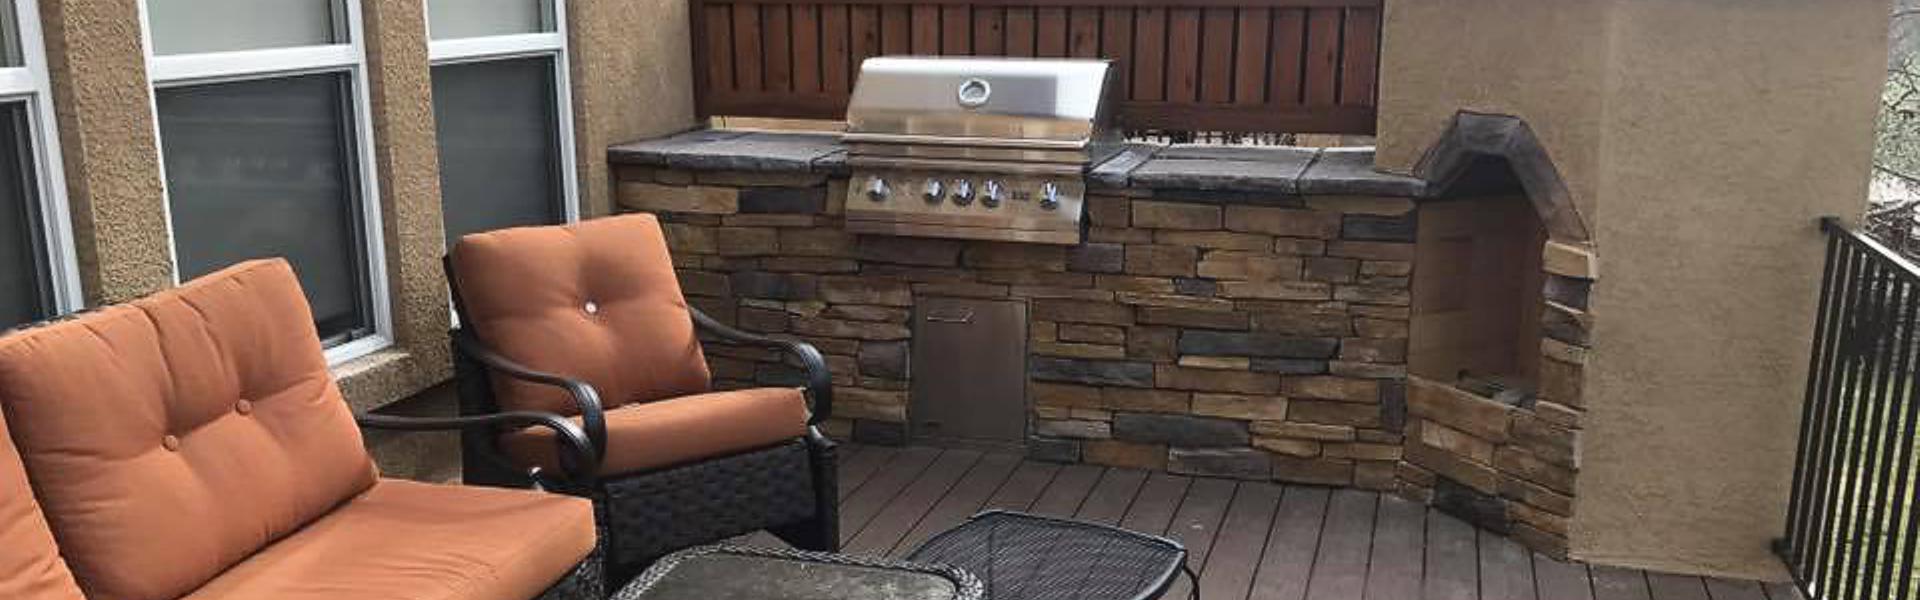 Deck & Stone Outdoor Living Spaces